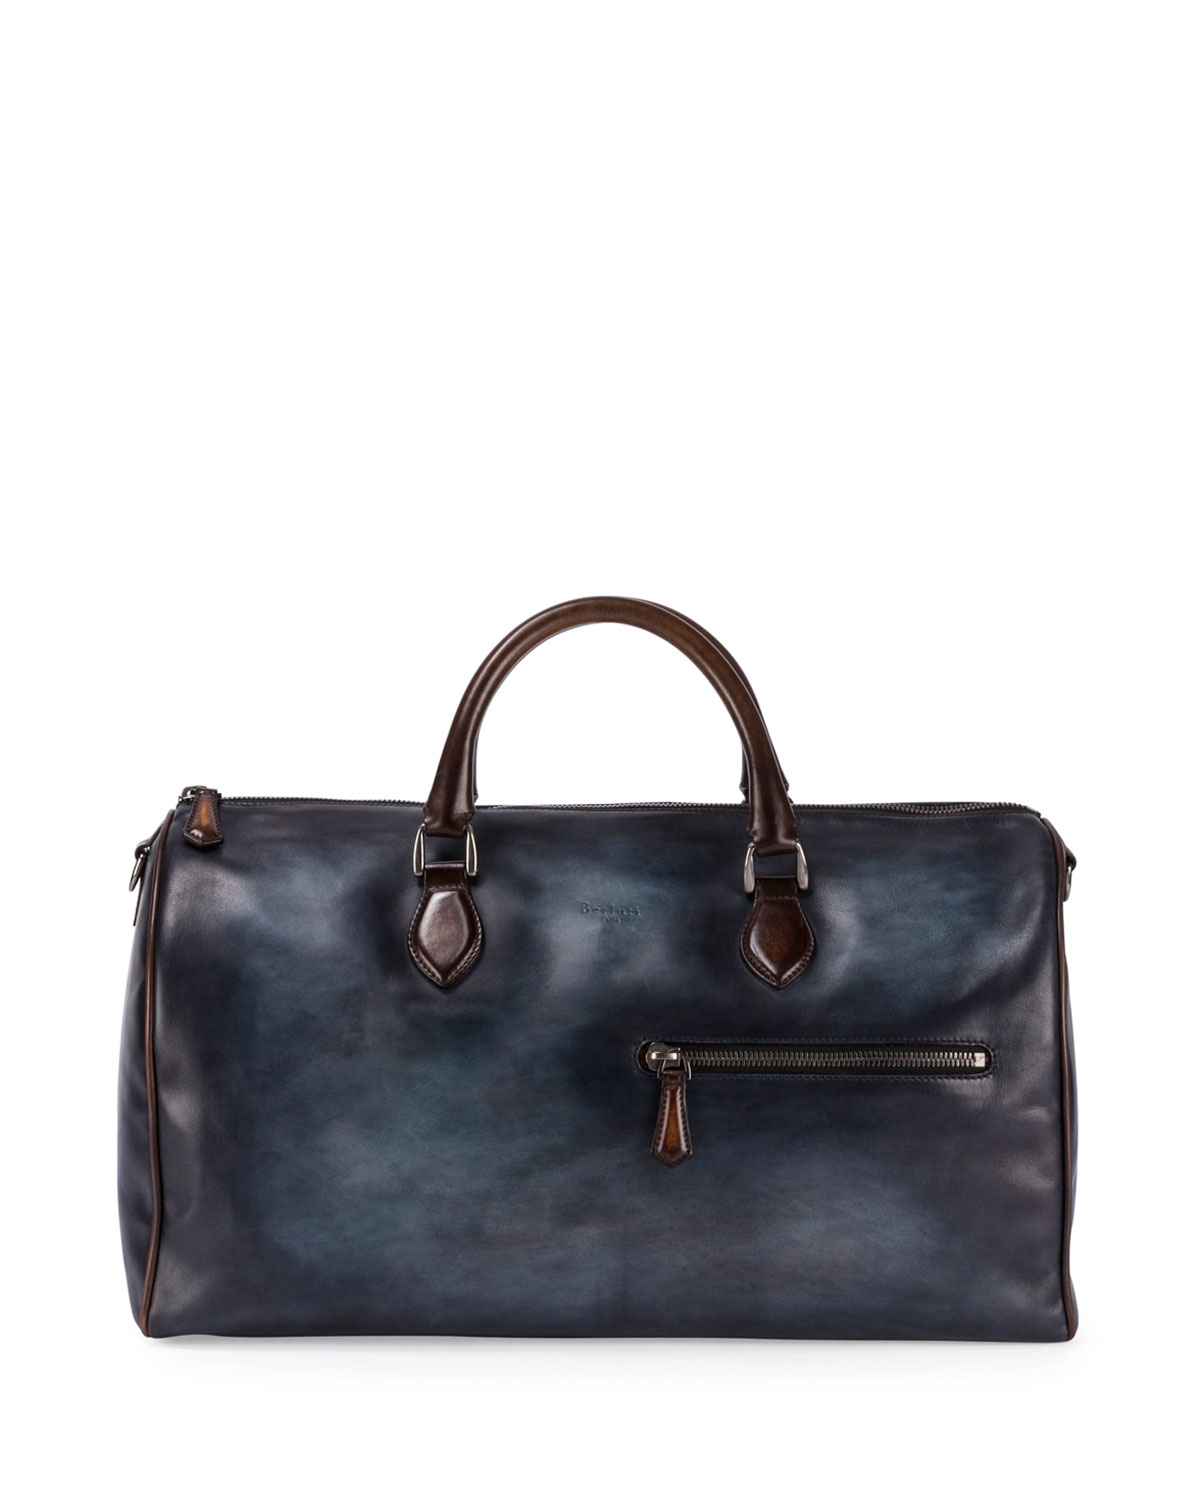 Lyst - Berluti Small Leather Duffle Bag in Blue for Men